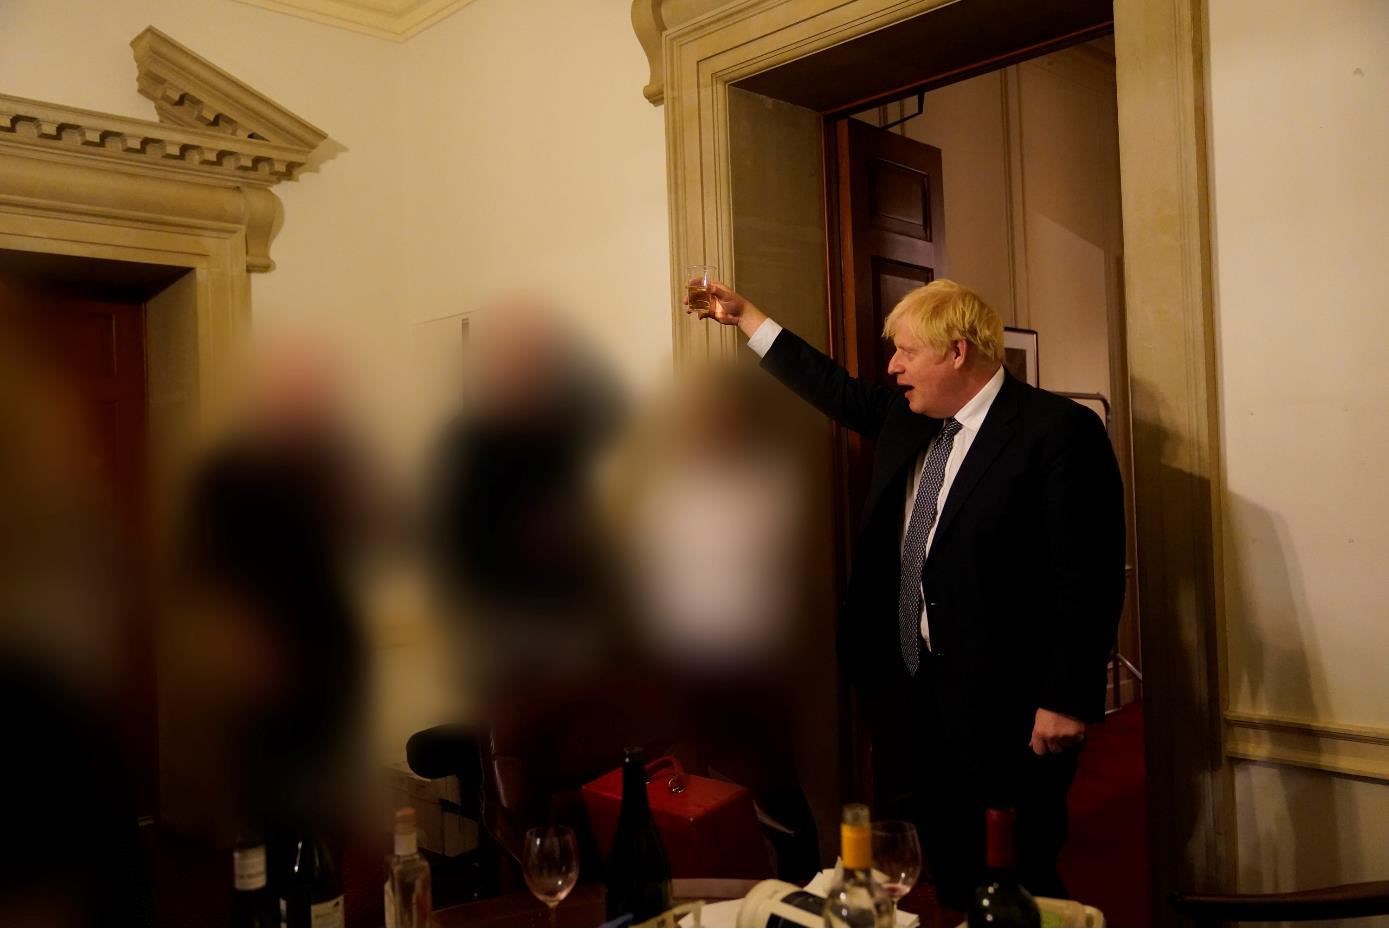 Prime Minister Boris Johnson at a gathering in 10 Downing Street for the departure of a special adviser, released with the publication of Sue’s Gray report into Downing Street parties in Whitehall during the coronavirus lockdown